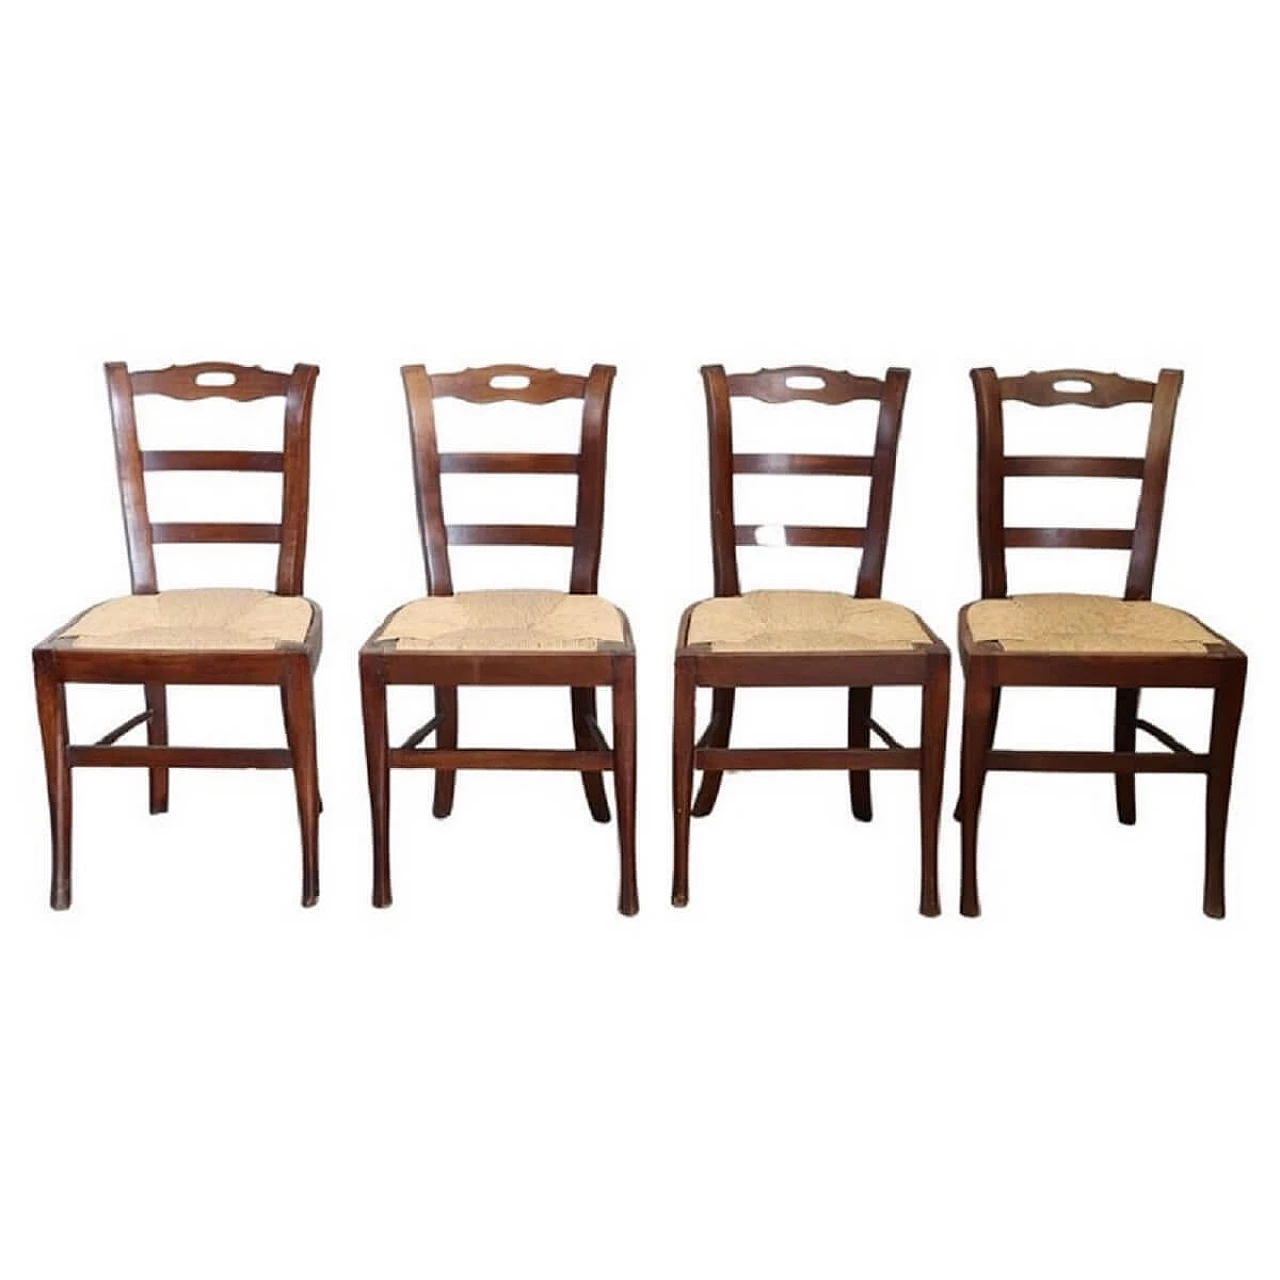 4 Chairs in solid cherry wood and straw, 19th century 1